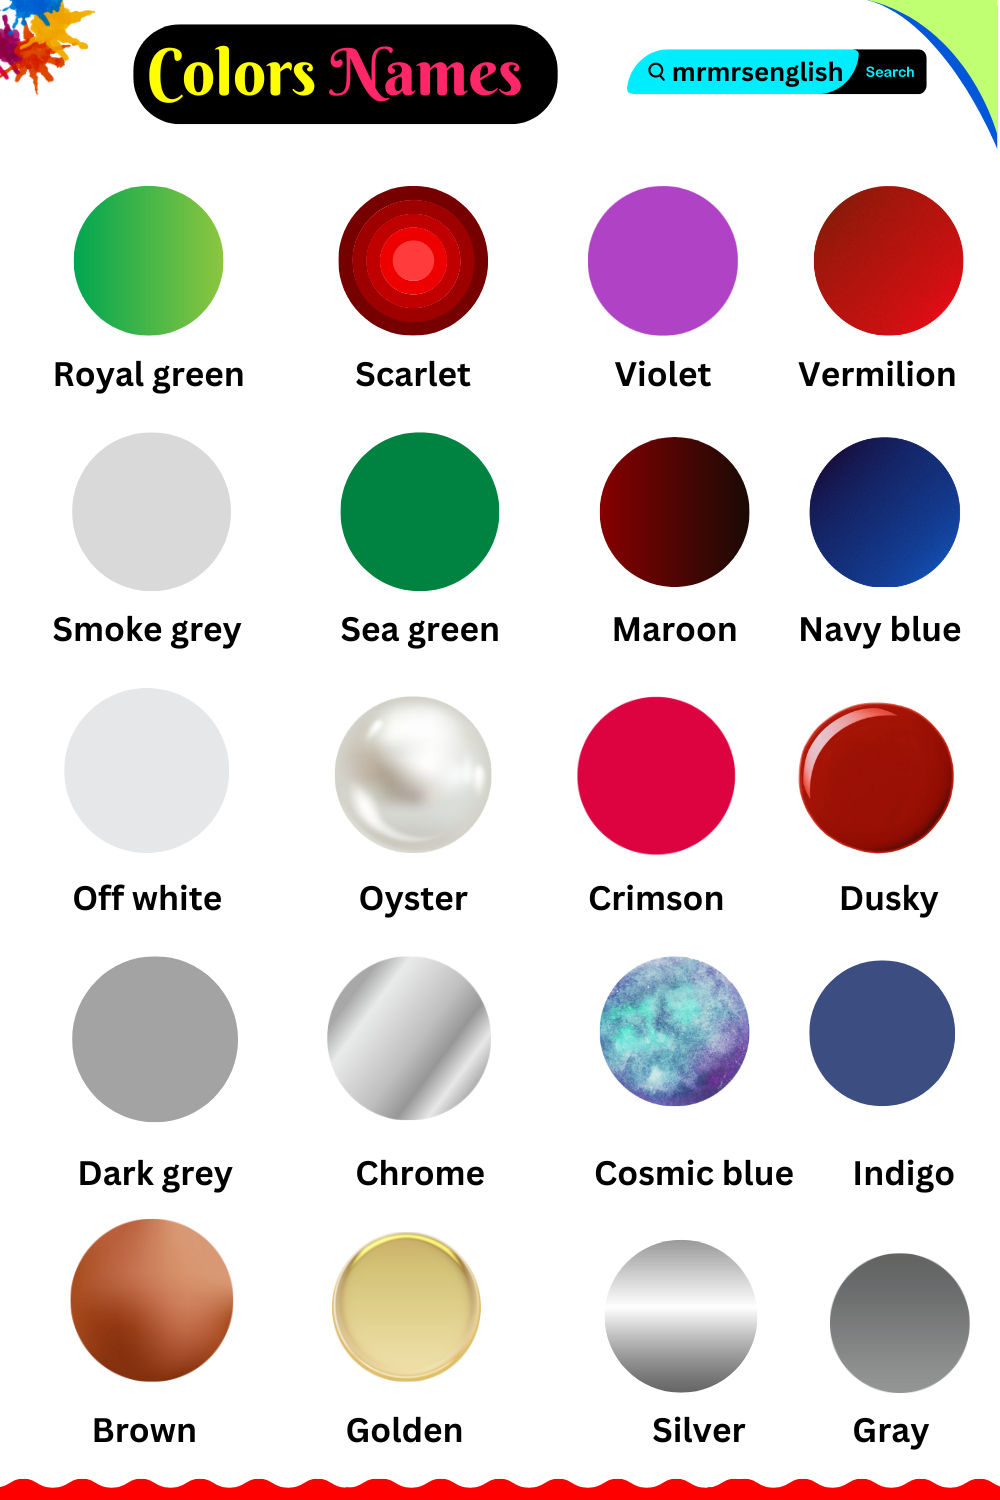 Colors Names Vocabulary in English